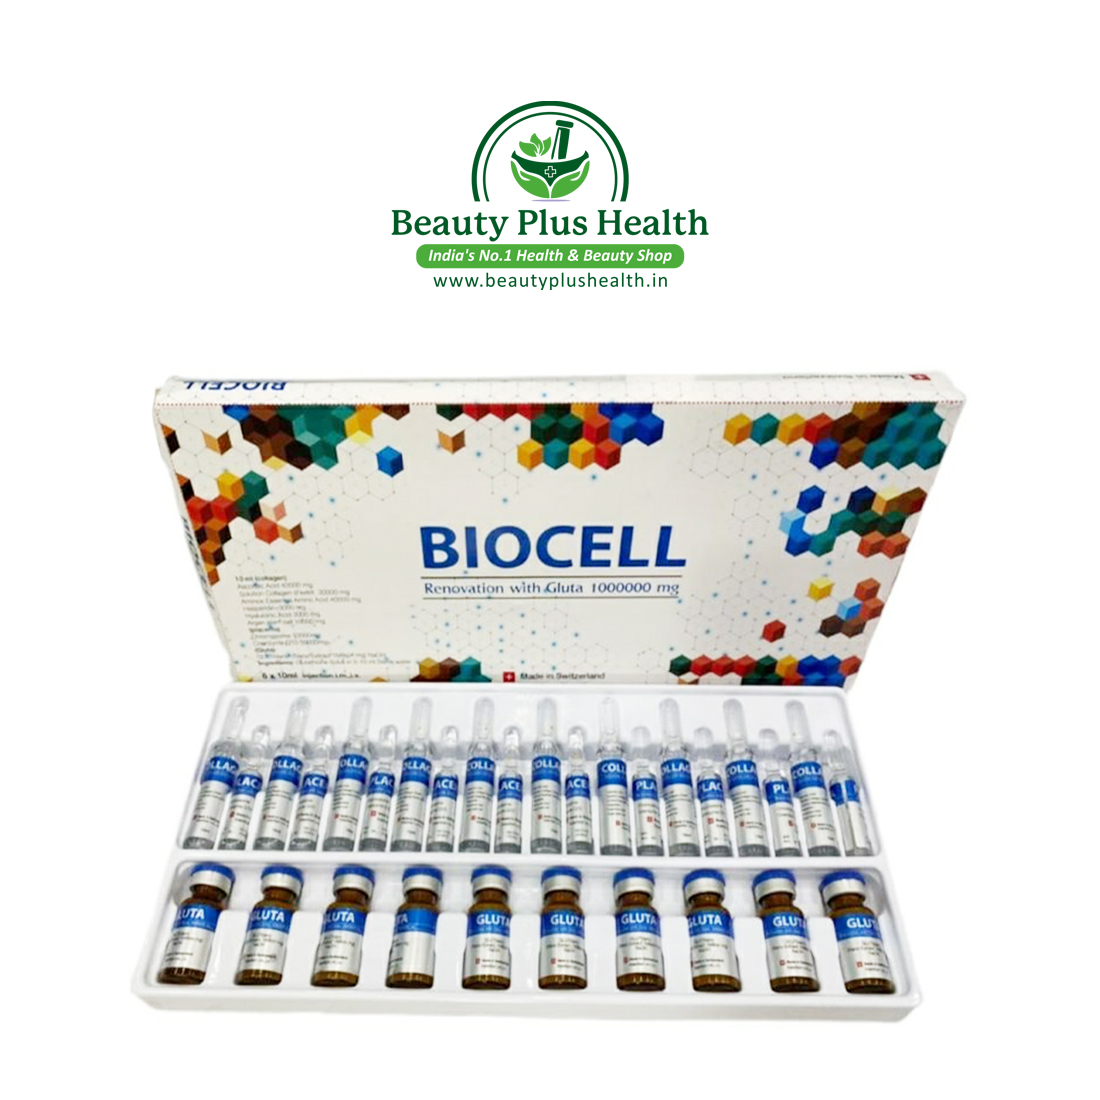 Biocell Renovation With Gluta 1000000mg Skin Whitening Injection